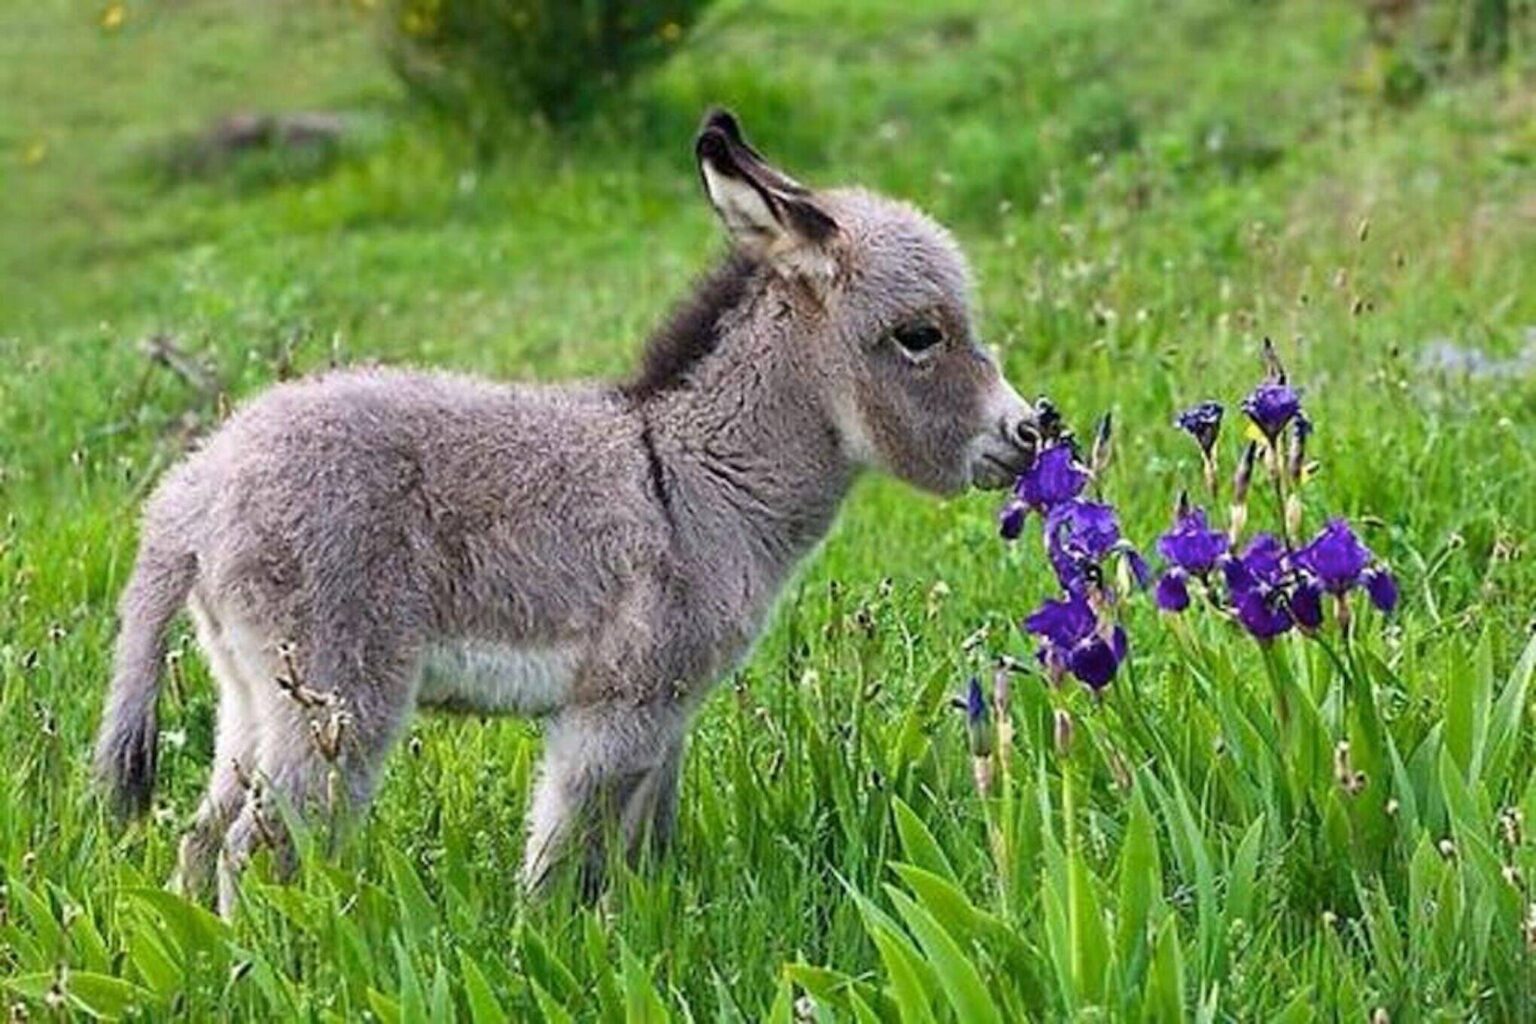 It may be easiest to get a dog or cat as a pet, but have you considered getting a baby donkey? Watch these baby donkey videos – you’ll soon be smitten.